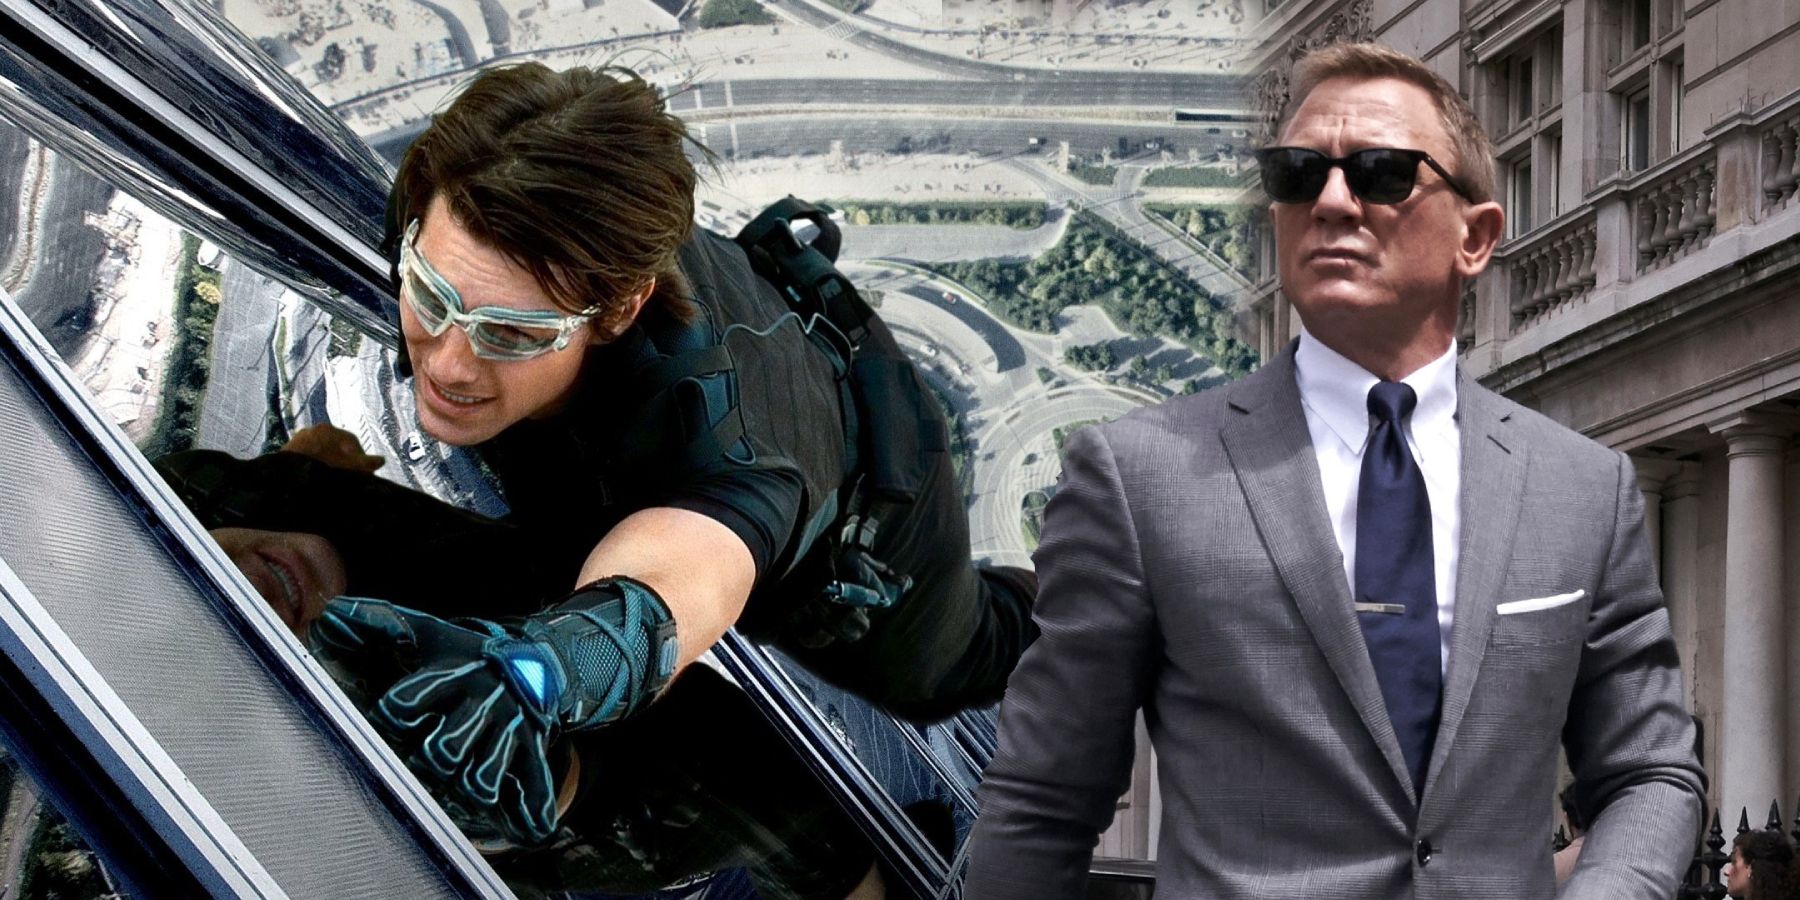 Tom Cruise as Ethan Hunt in Mission: Impossible and Daniel Craig as James Bond